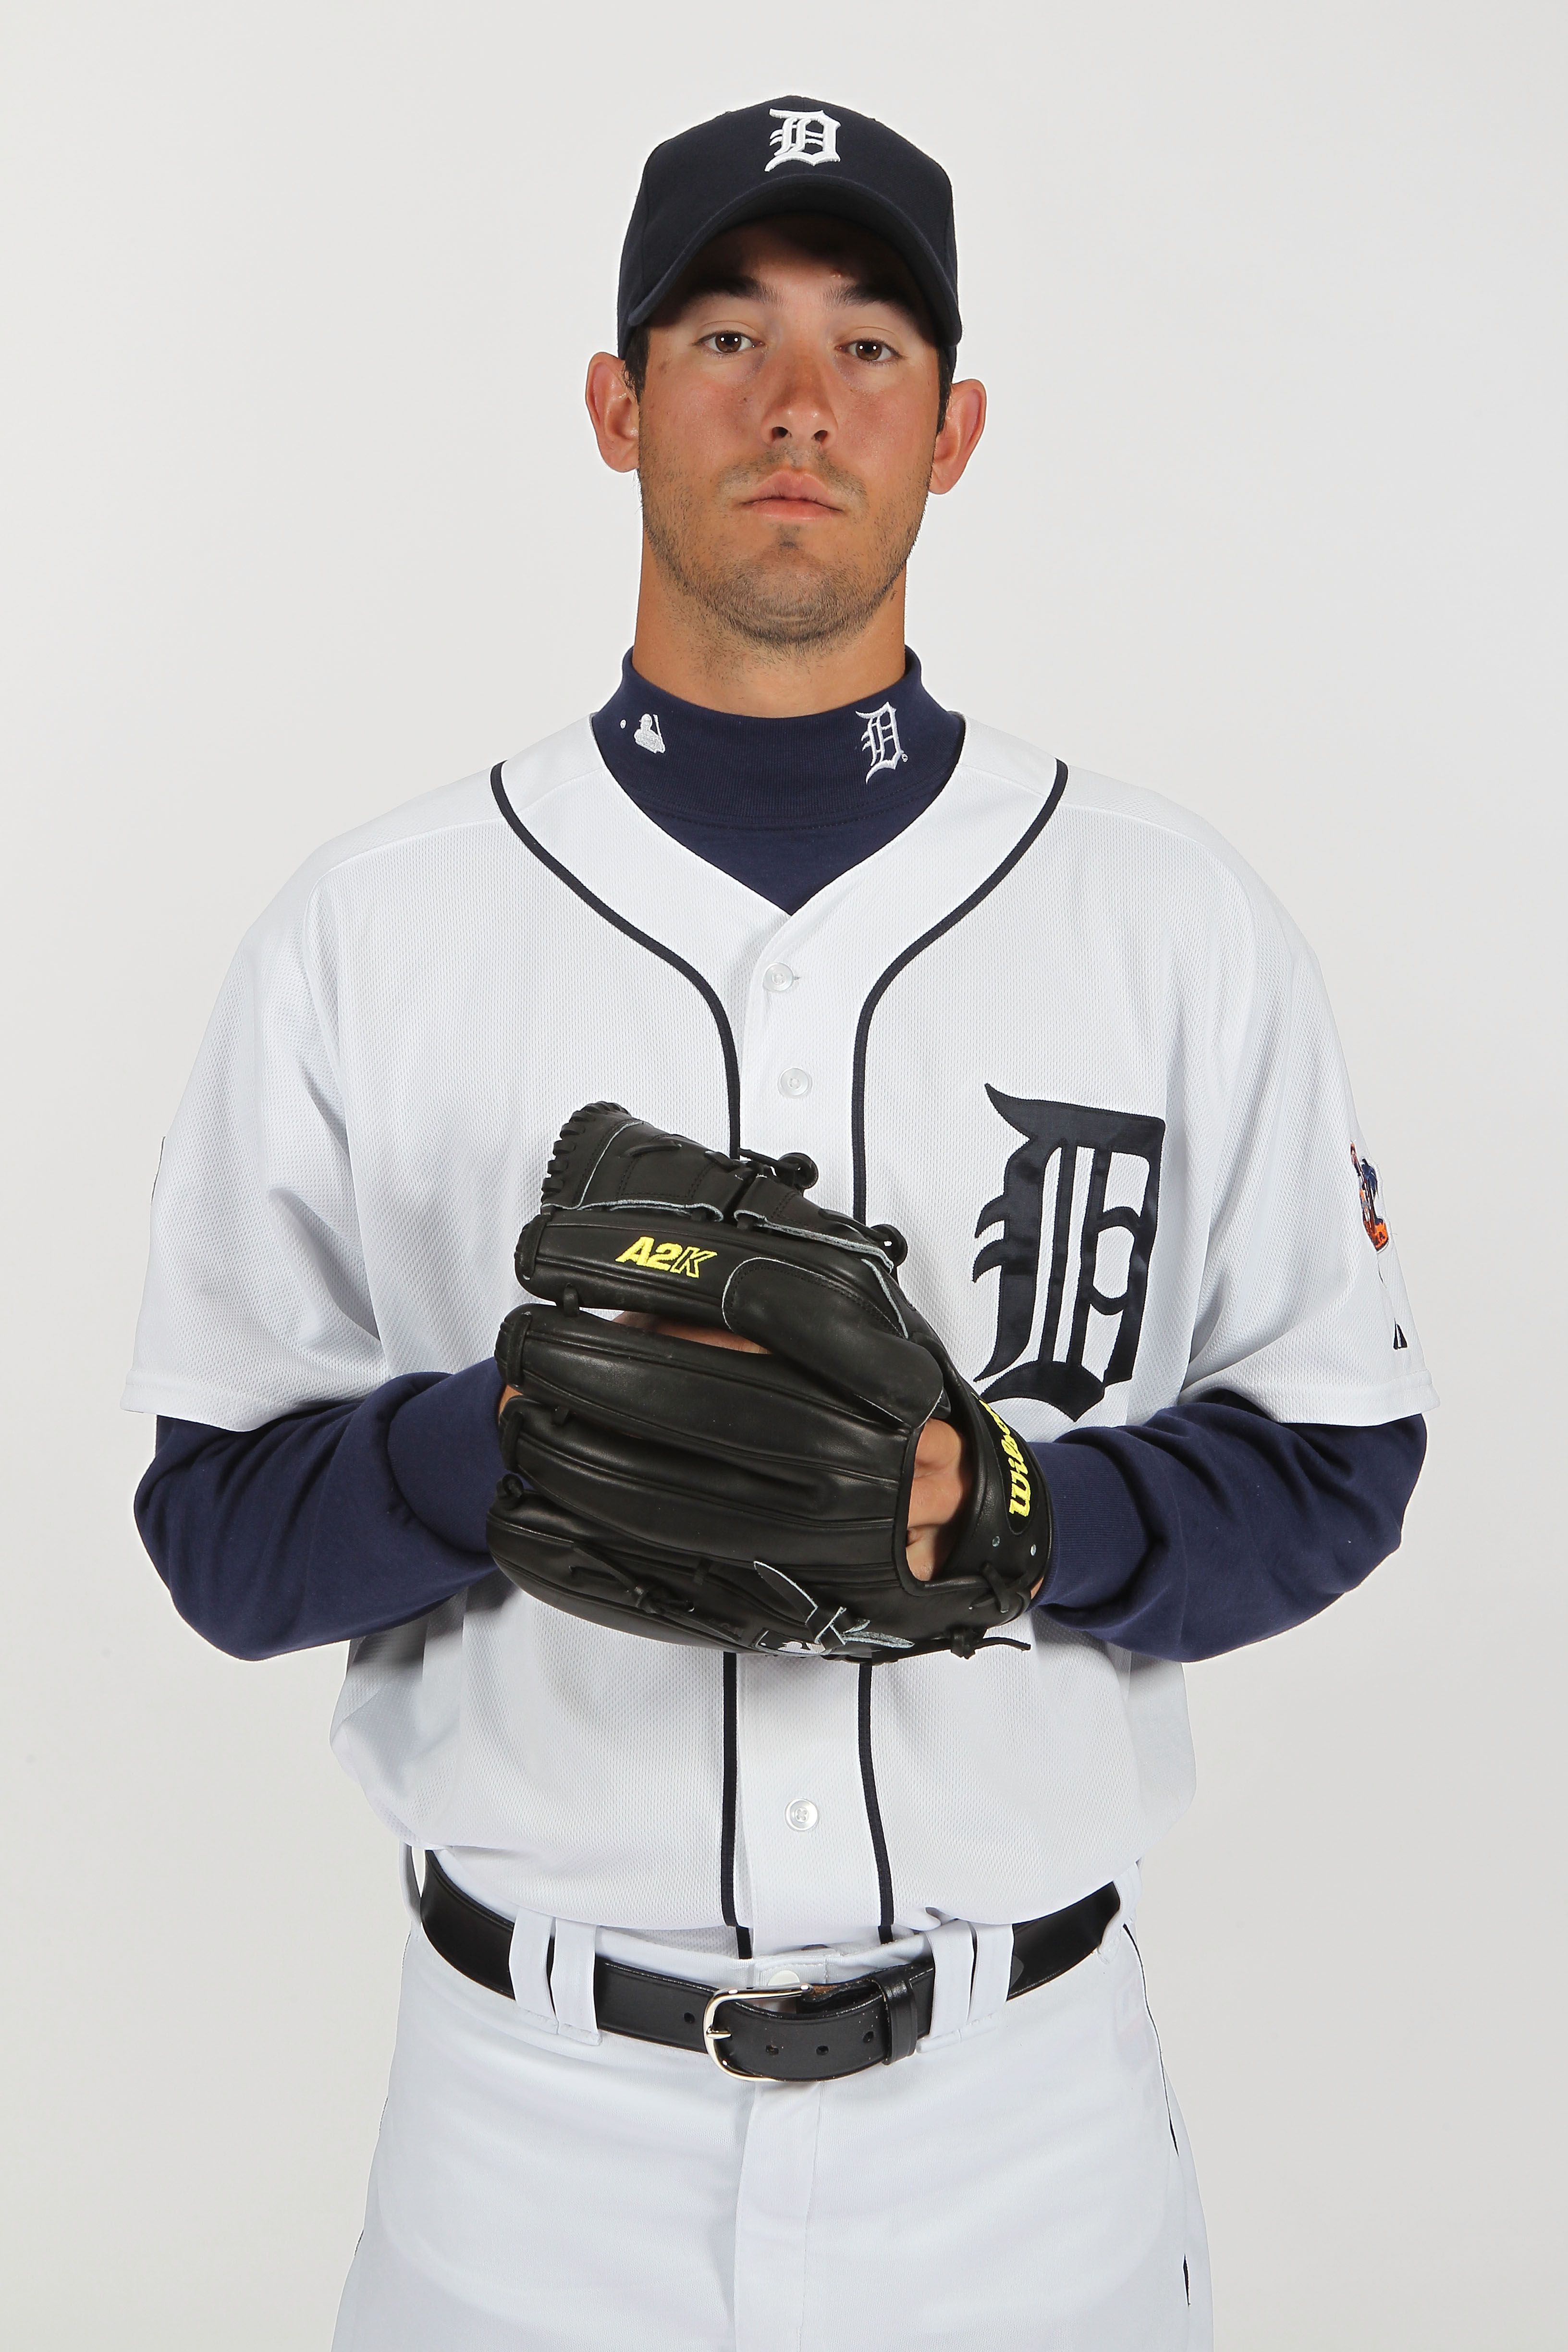 LAKELAND, FL - FEBRUARY 21:  Rick Porcello #48 of the Detroit Tigers poses for a portrait during Photo Day on February 21, 2011  at Joker Marchant Stadium in Lakeland, Florida.  (Photo by Nick Laham/Getty Images)